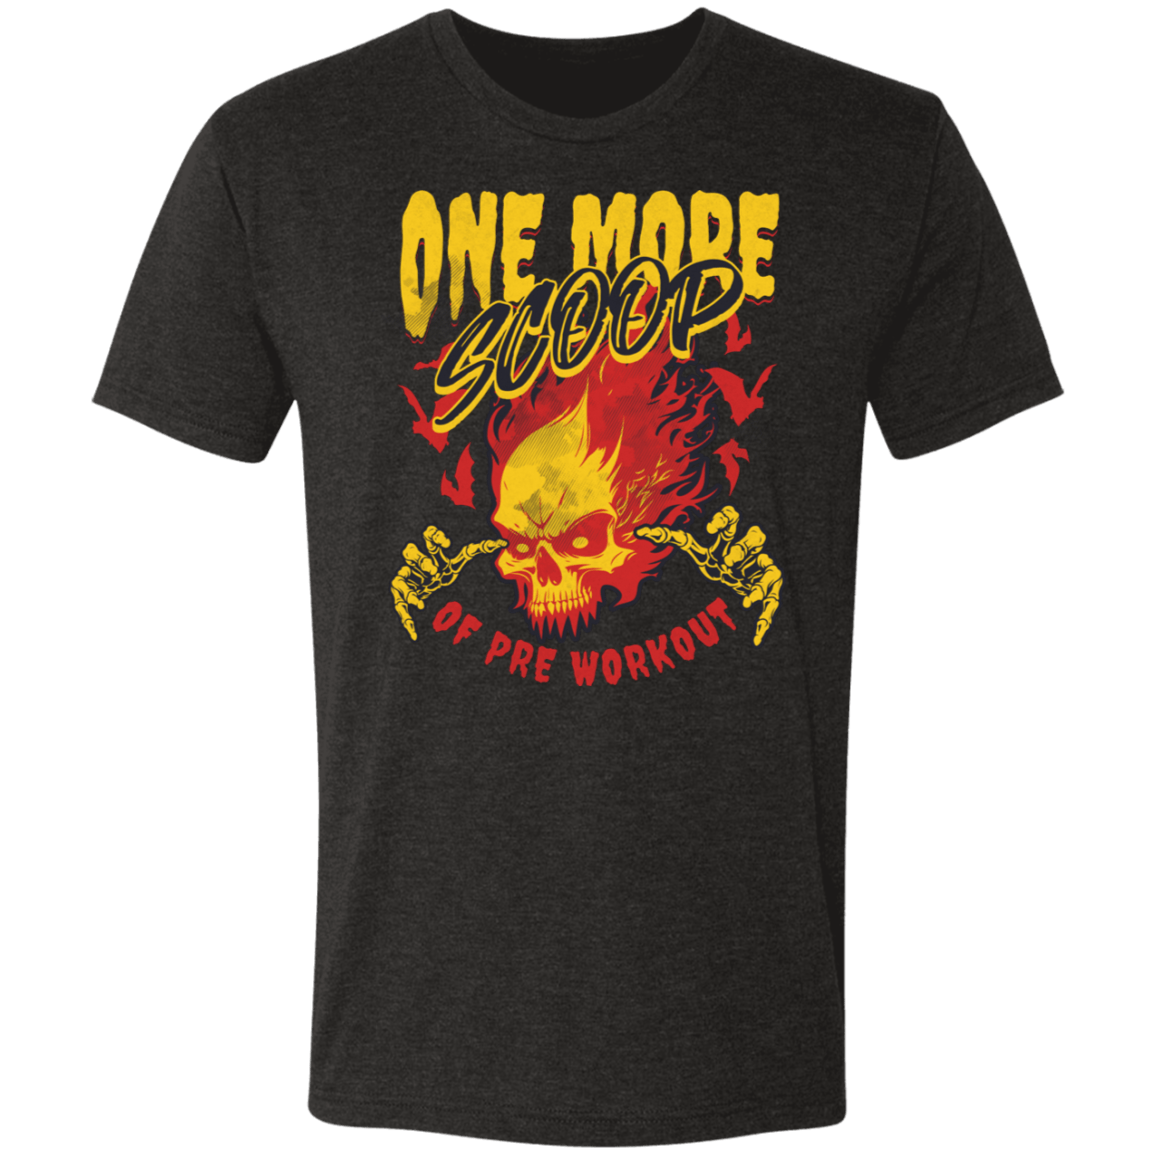 One More Scoop Gym Tee - T-Shirts